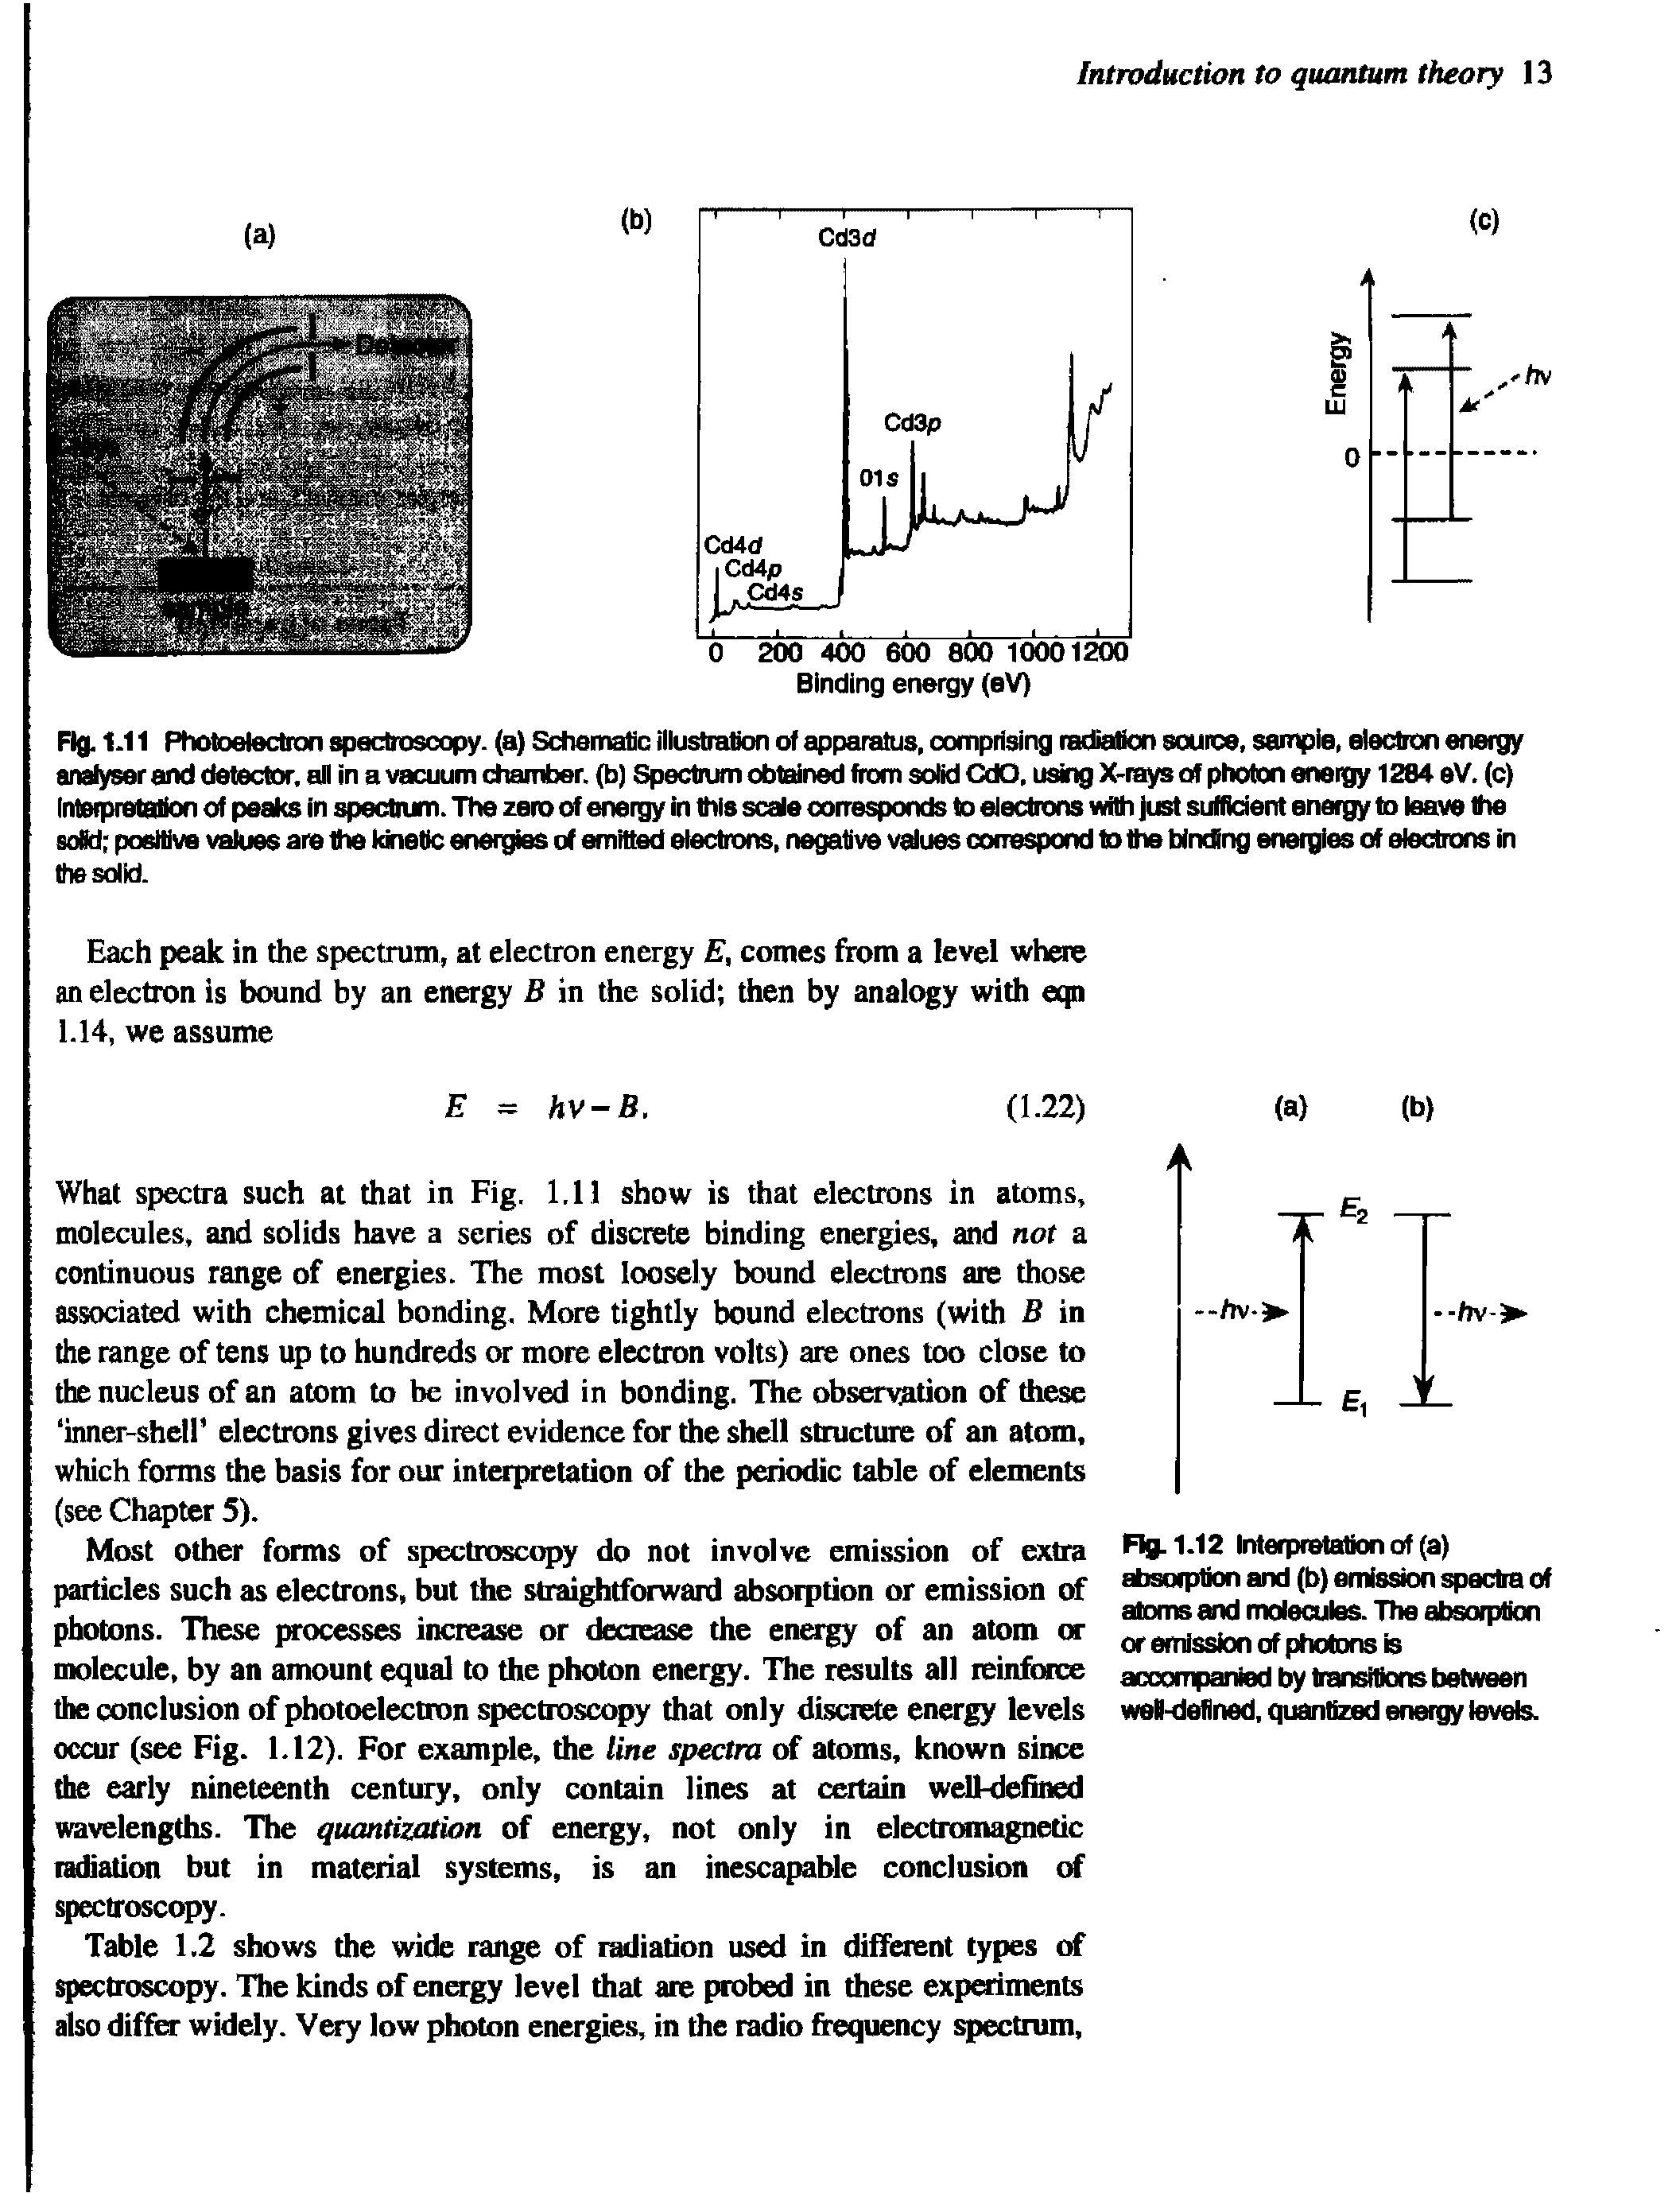 Fig. 1.11 Photoelectron spectroscopy, (a) Schematic illustration of apparatus, comprising radiation source, sample, electron energy analyser and detector, all in a vacuum chamber, (b) Spectrum obtained from solid CdO, using X-rays of photon energy 1284 eV. (c) Interpretation of peaks in spectrum. The zero of energy in this scale corresponds to electrons with just sufficient energy to leave the solid positive values are the kinetic energies of emitted electrons, negative values correspond to the binding energies of electrons in the solid.